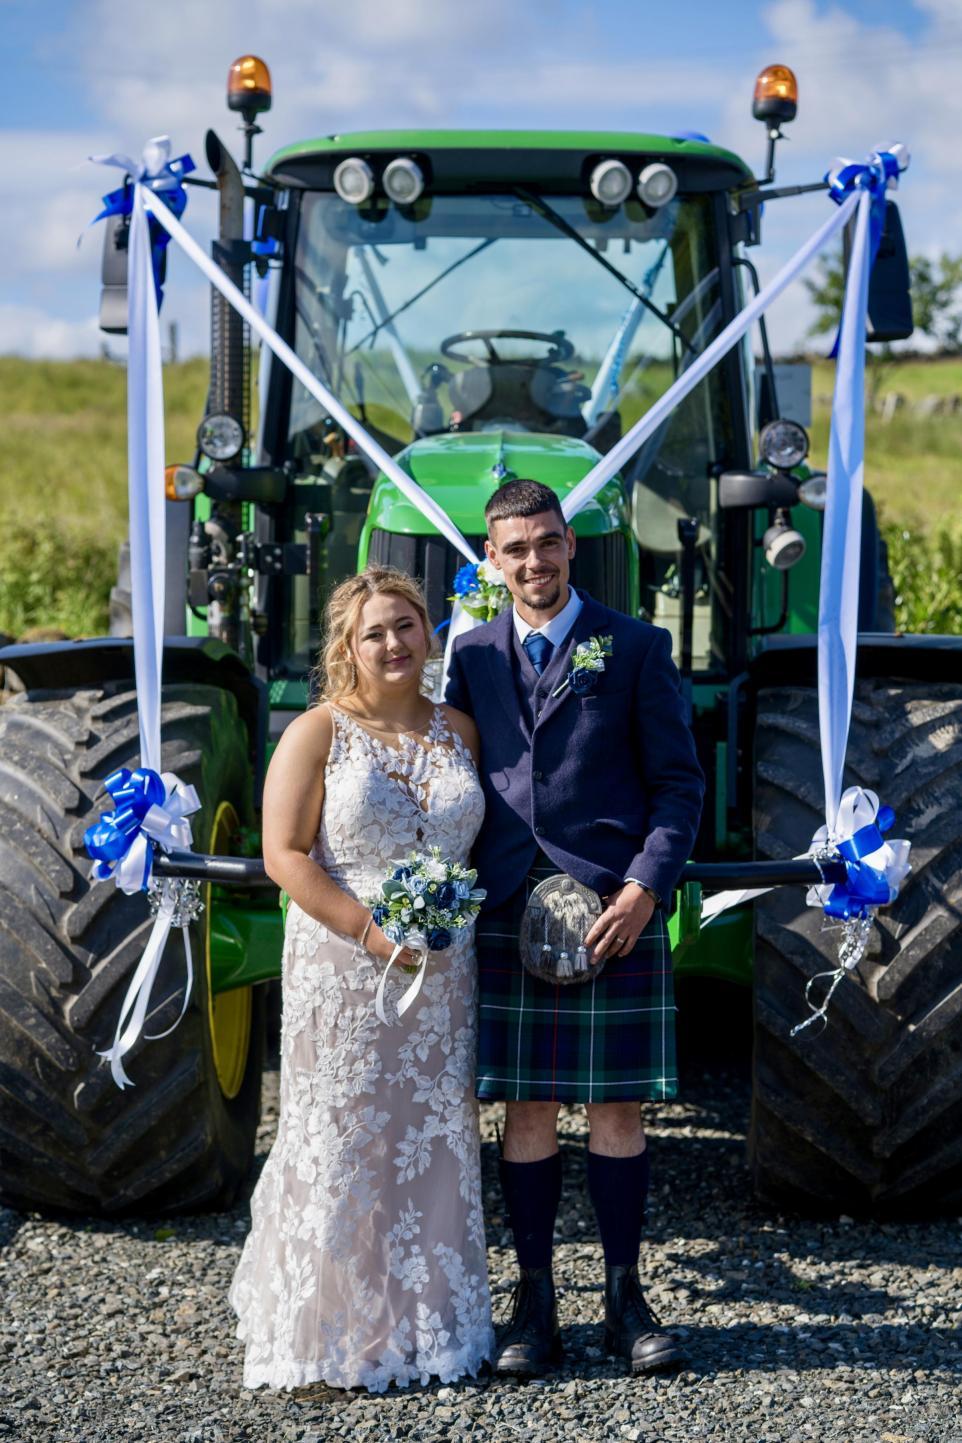 Eilidh McKay and Sam Baker Tie the Knot at Backwater Dam, Glenisla: Beautiful Wedding Photography by Marlyn McInnes